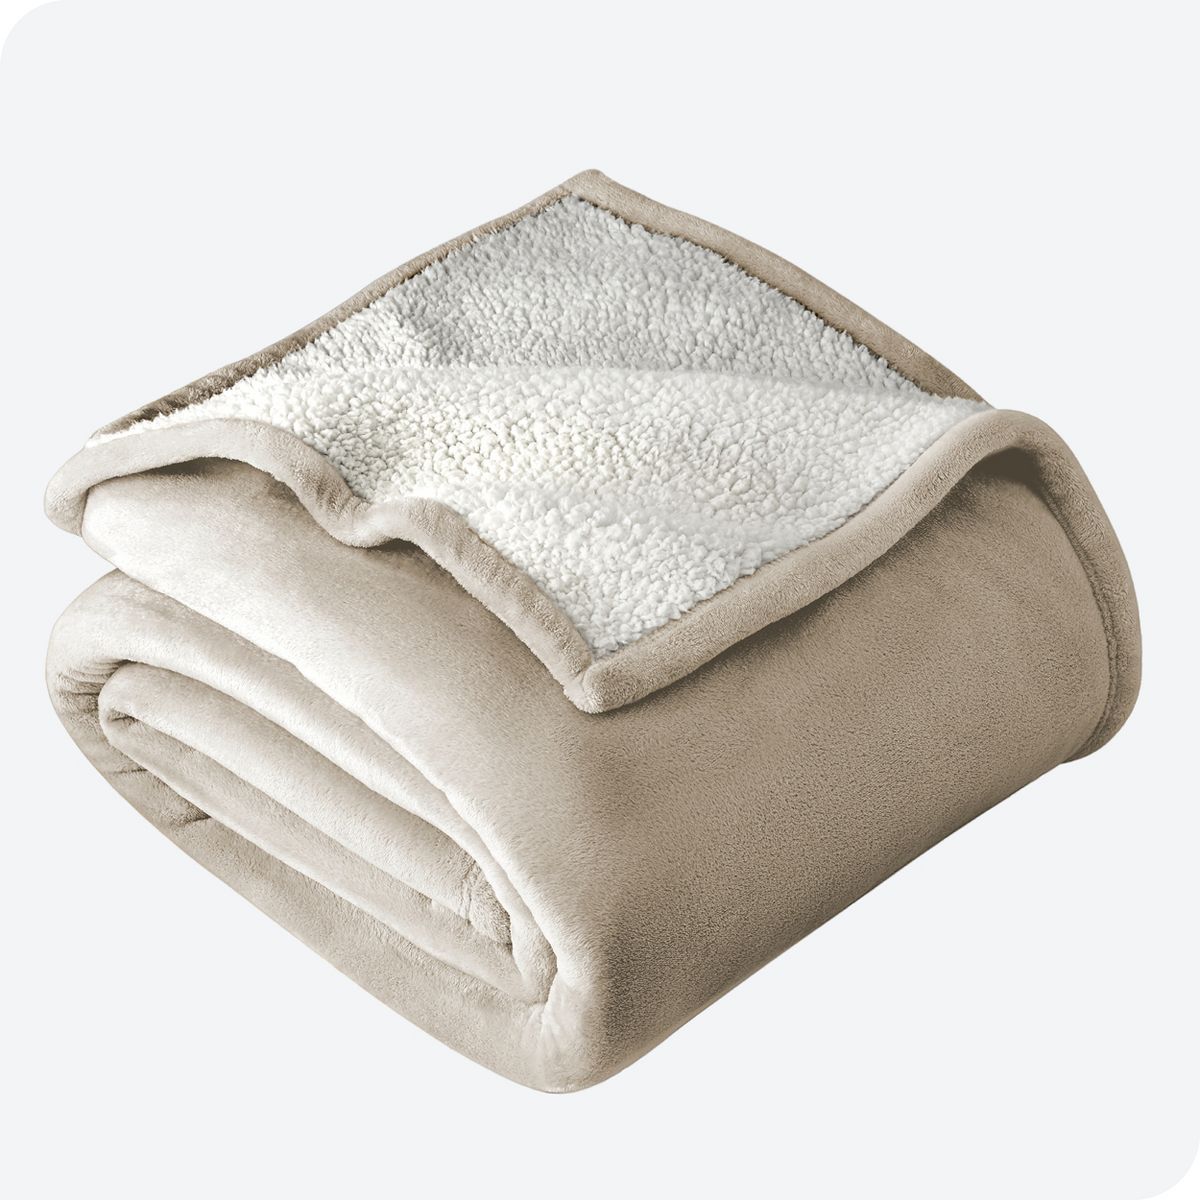 Faux Shearling Fleece Blanket by Bare Home | Target